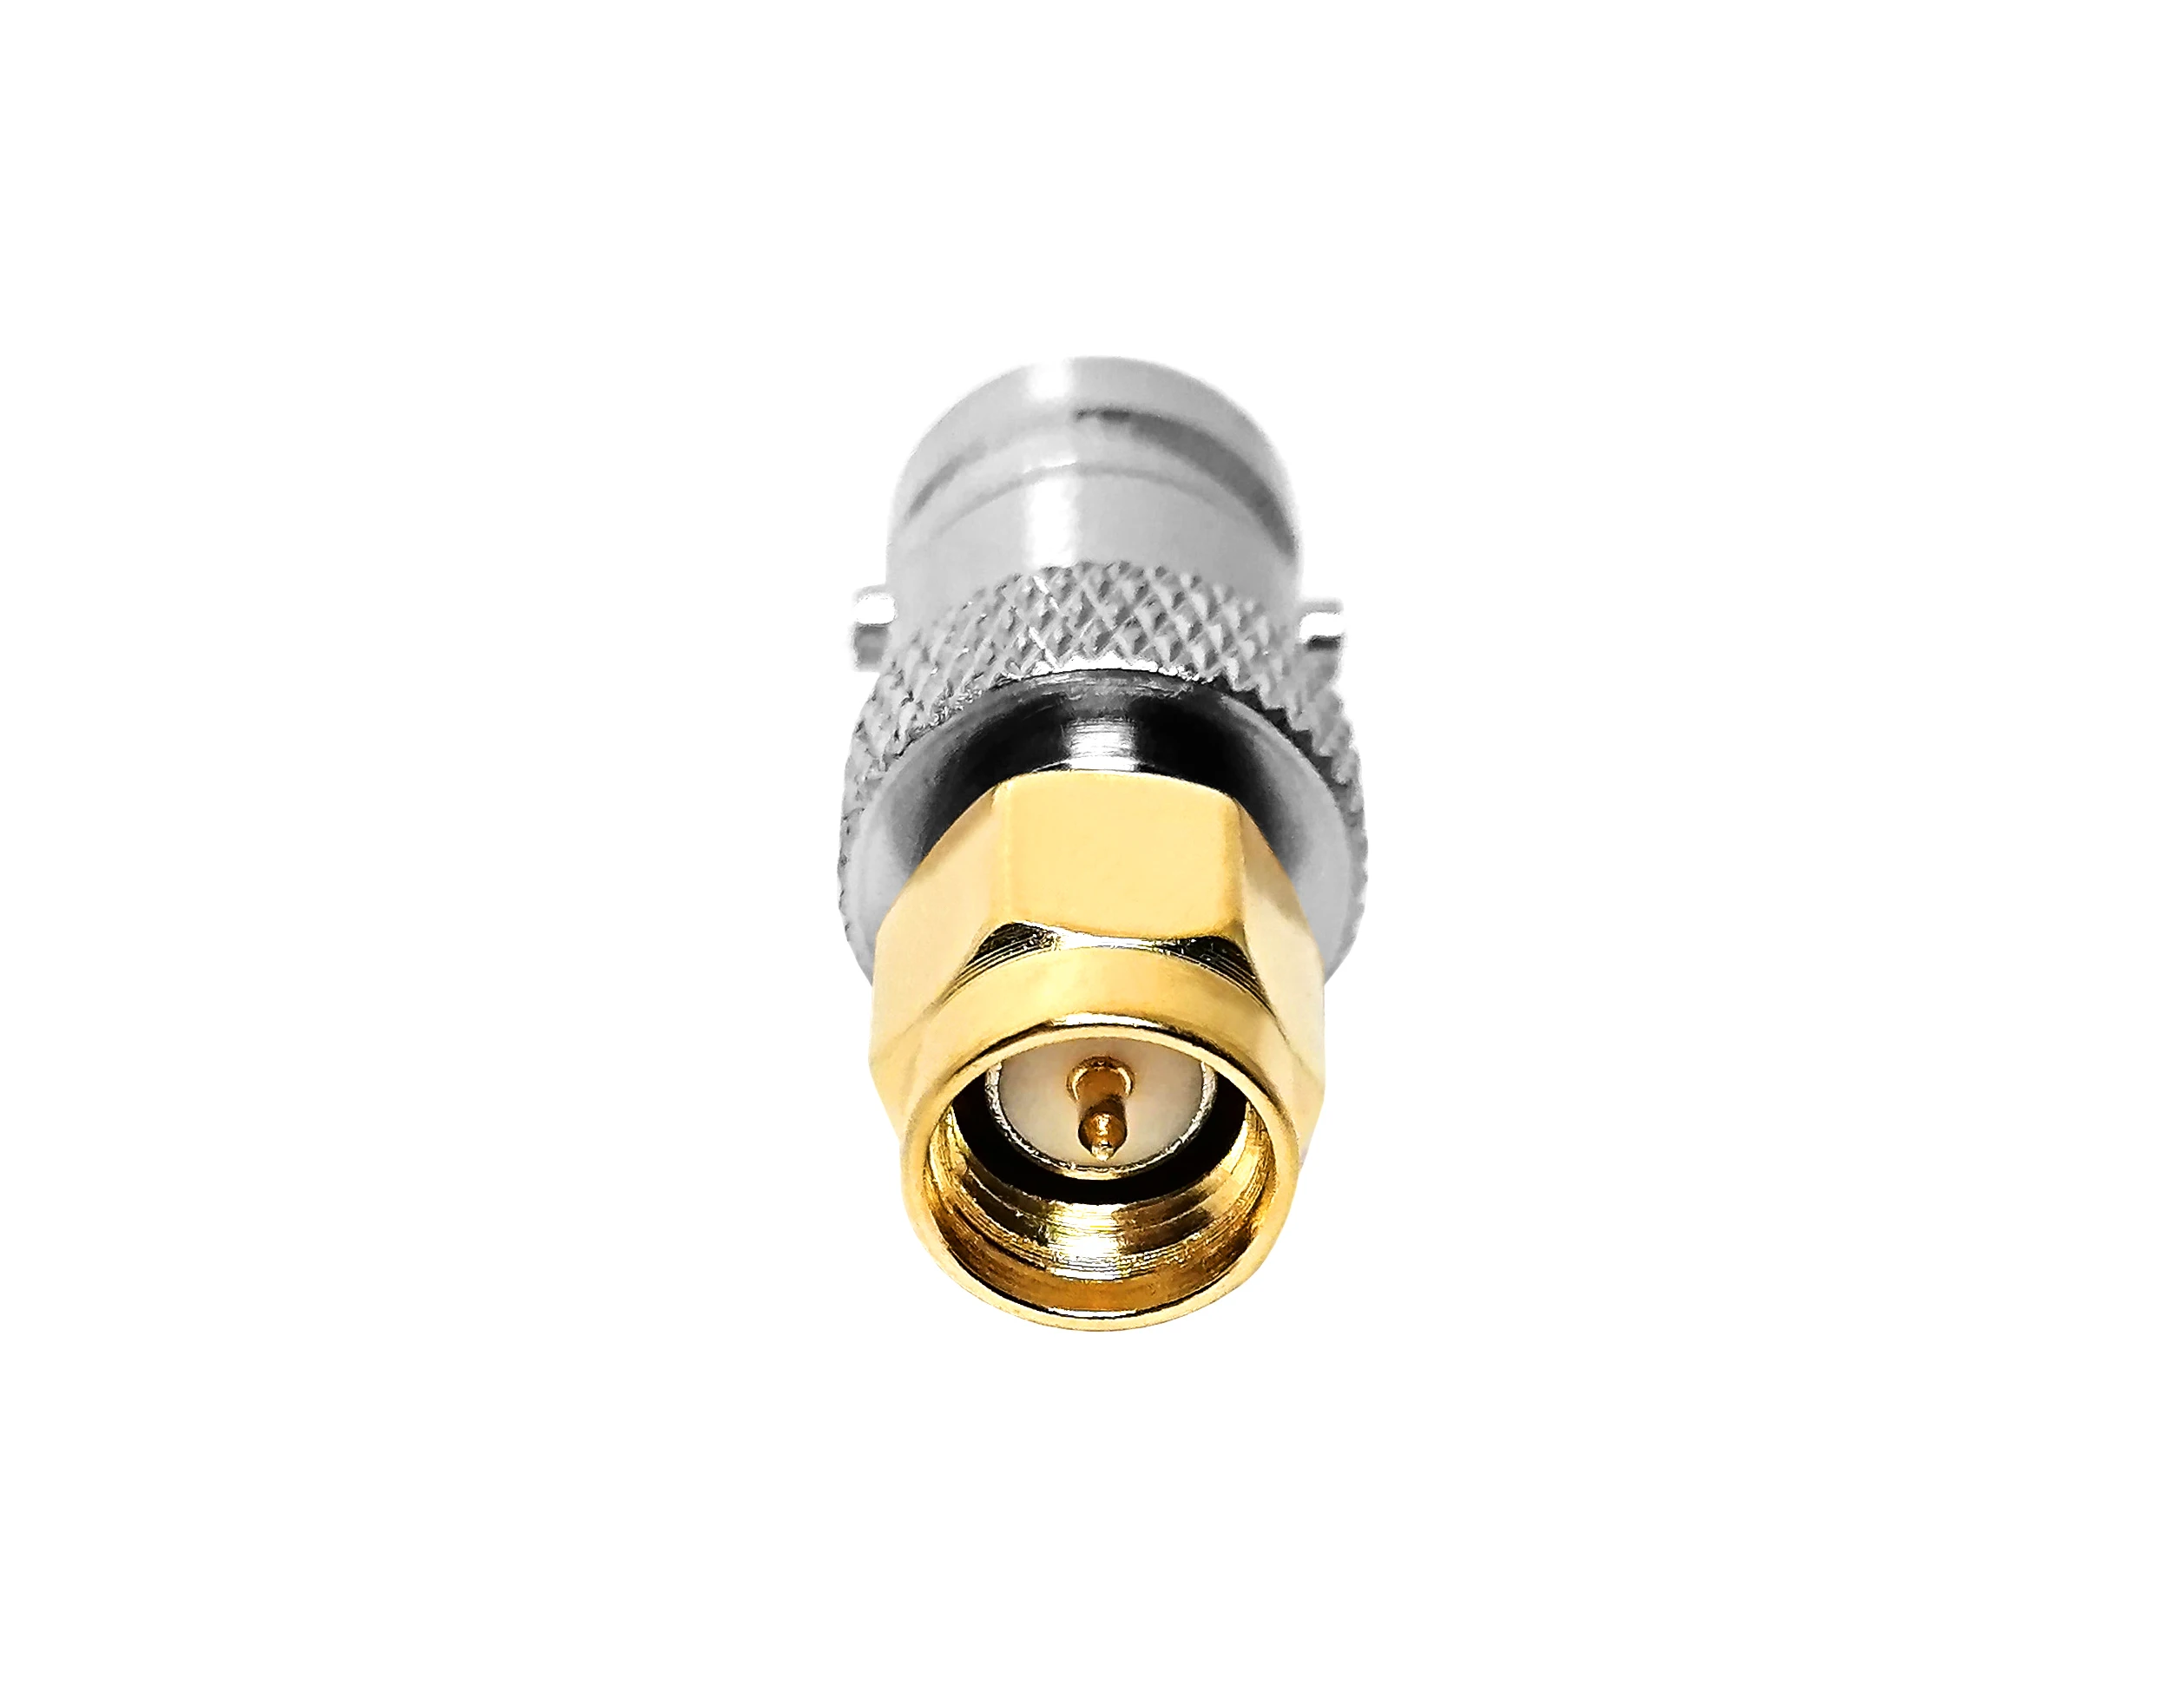 Adaptor Reverse polarity sma female jack to bnc male plug rf coaxial connector adapter factory